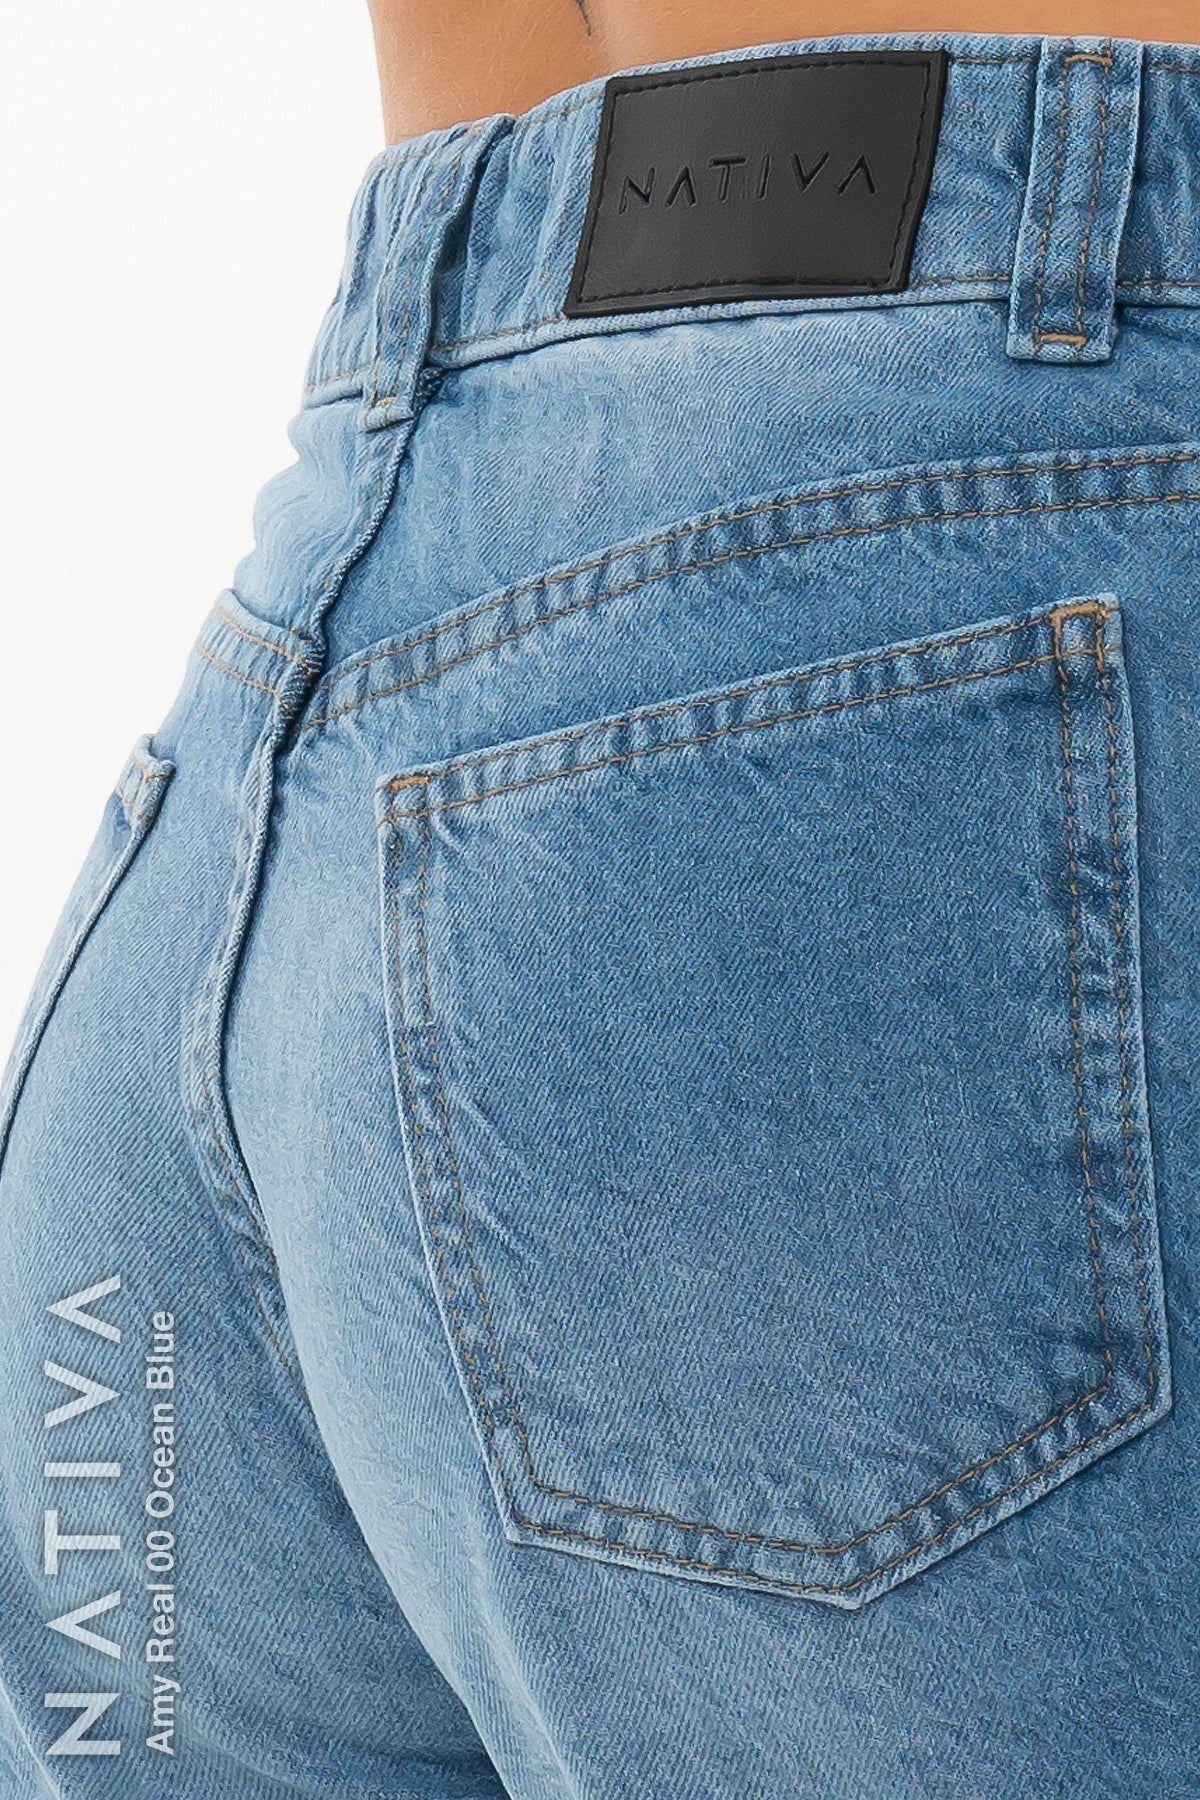 NATIVA, RIGID JEANS. AMY REAL 01 OCEAN BLUE, Authentic & Extra Durable,  Hi-Rise Relaxed Mom Shorts